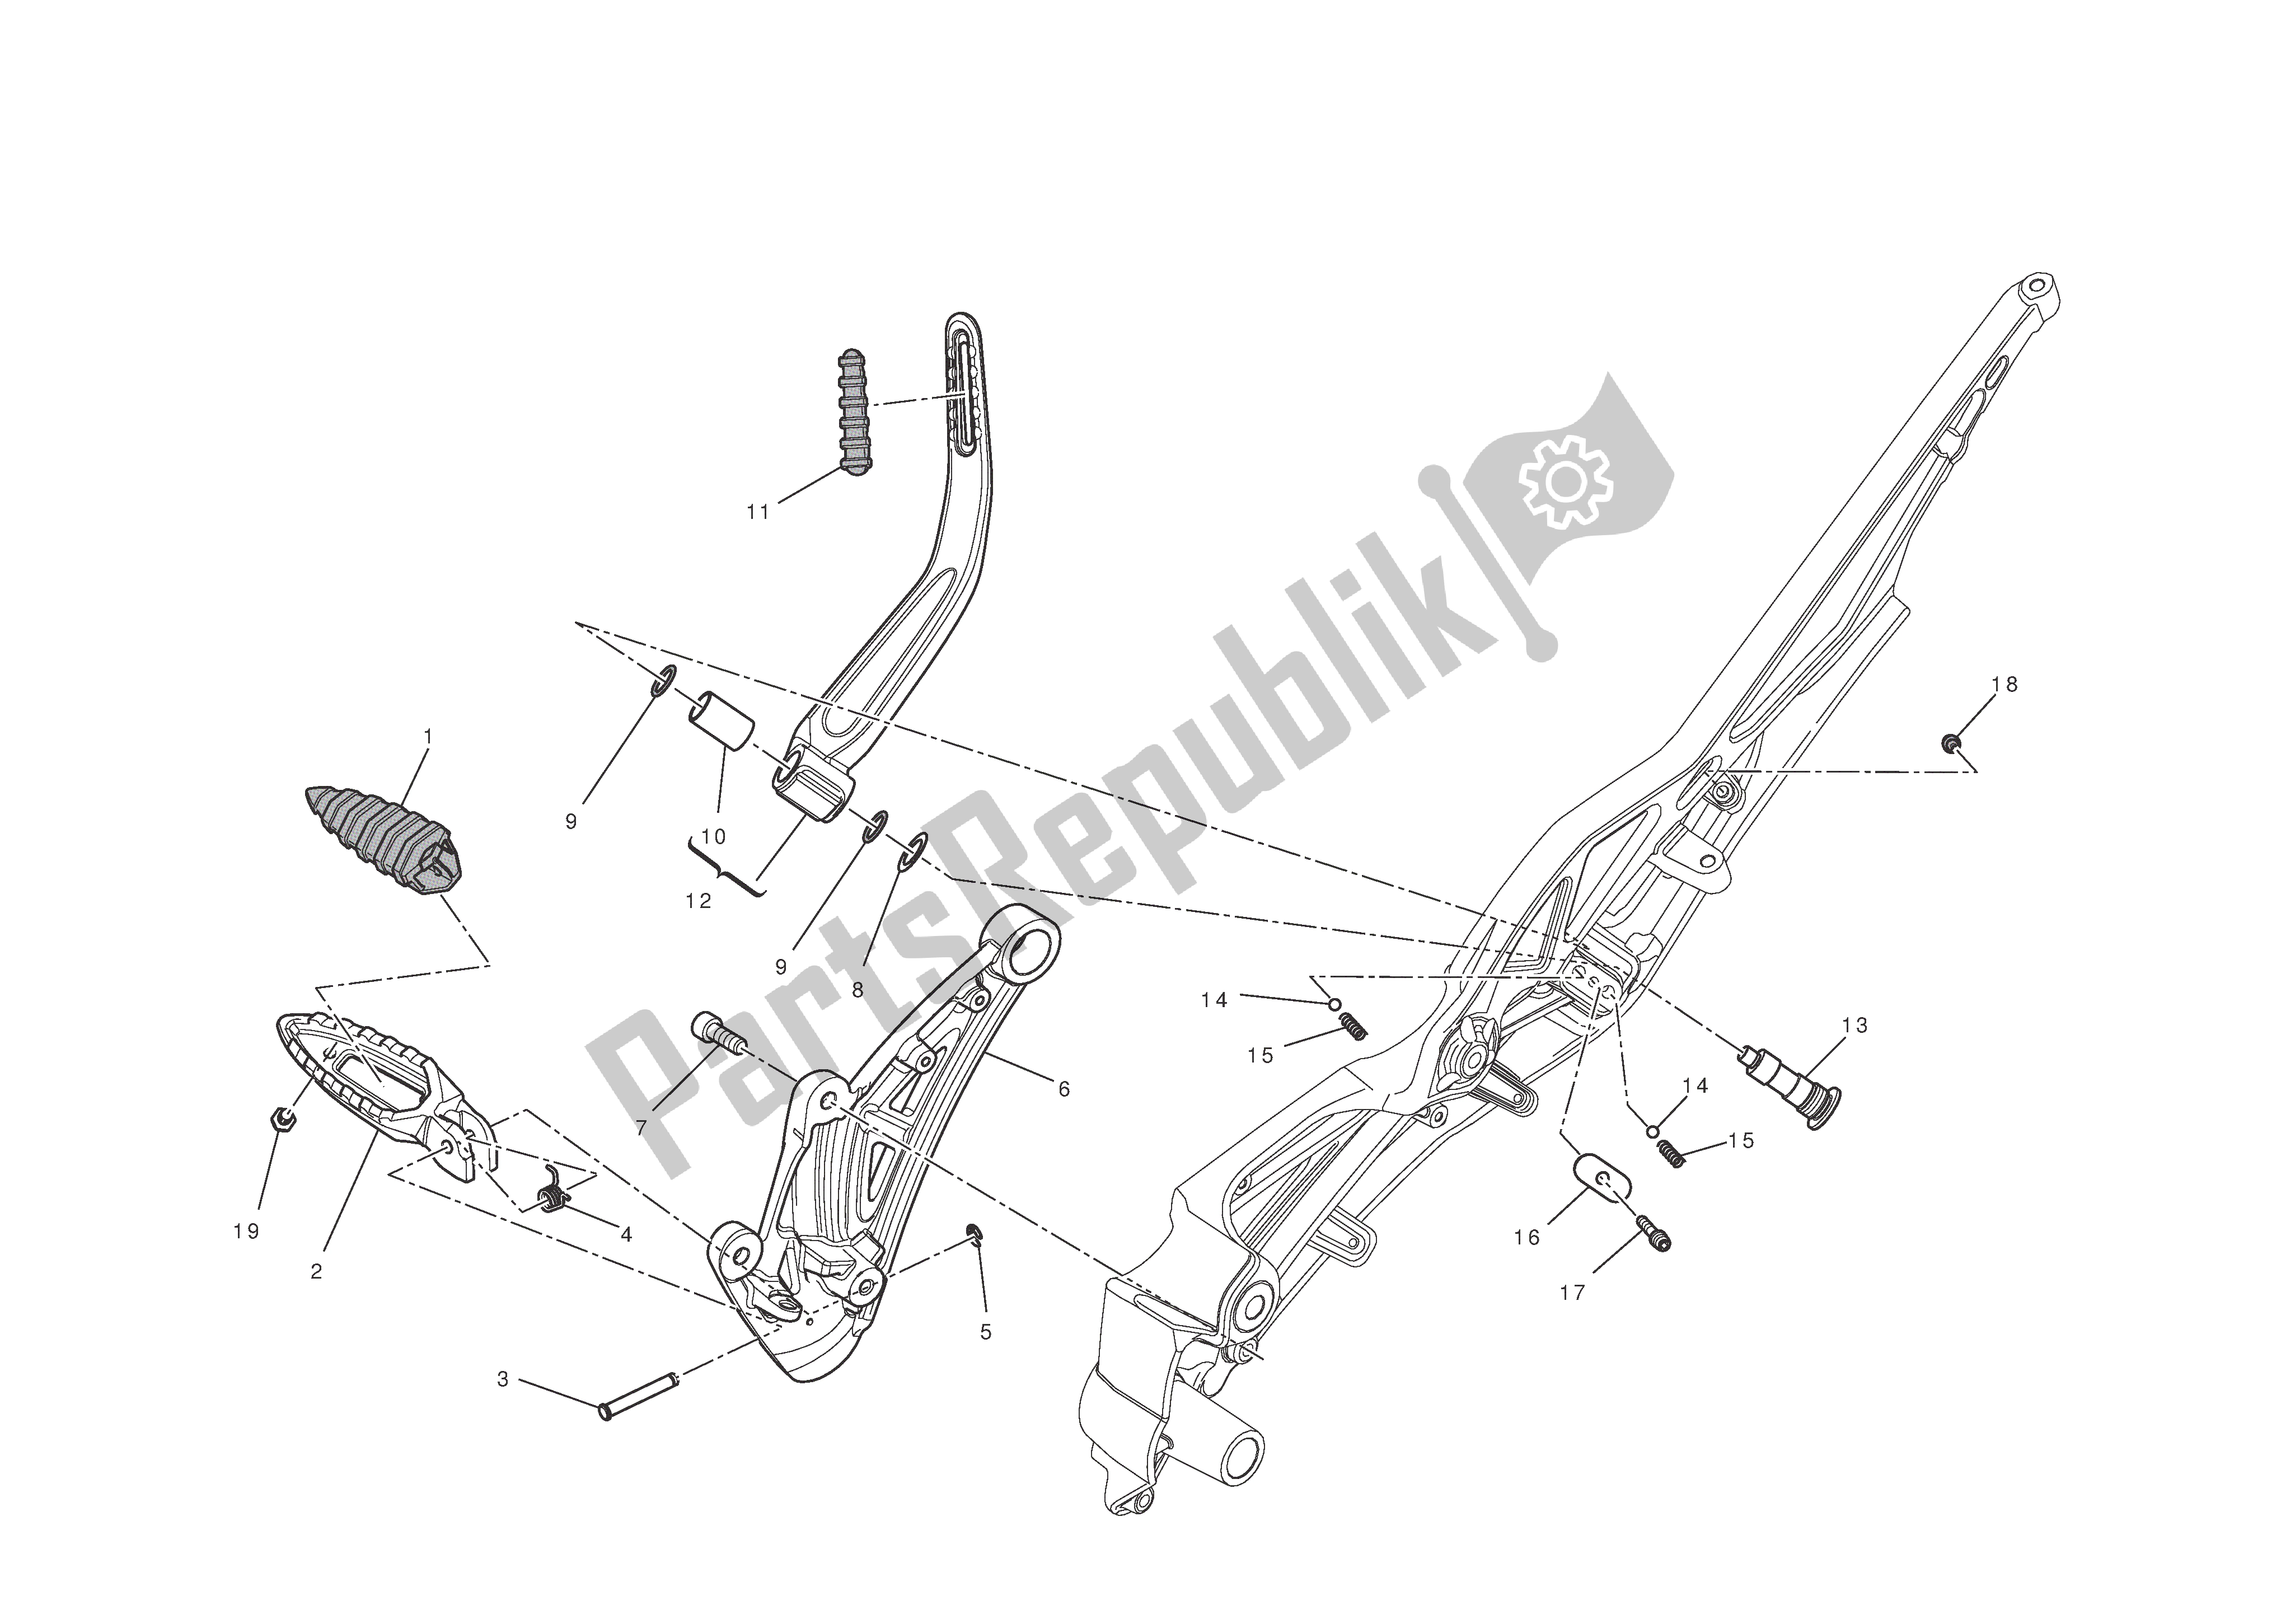 All parts for the R. H. Footrests of the Ducati Diavel AMG 1200 2013